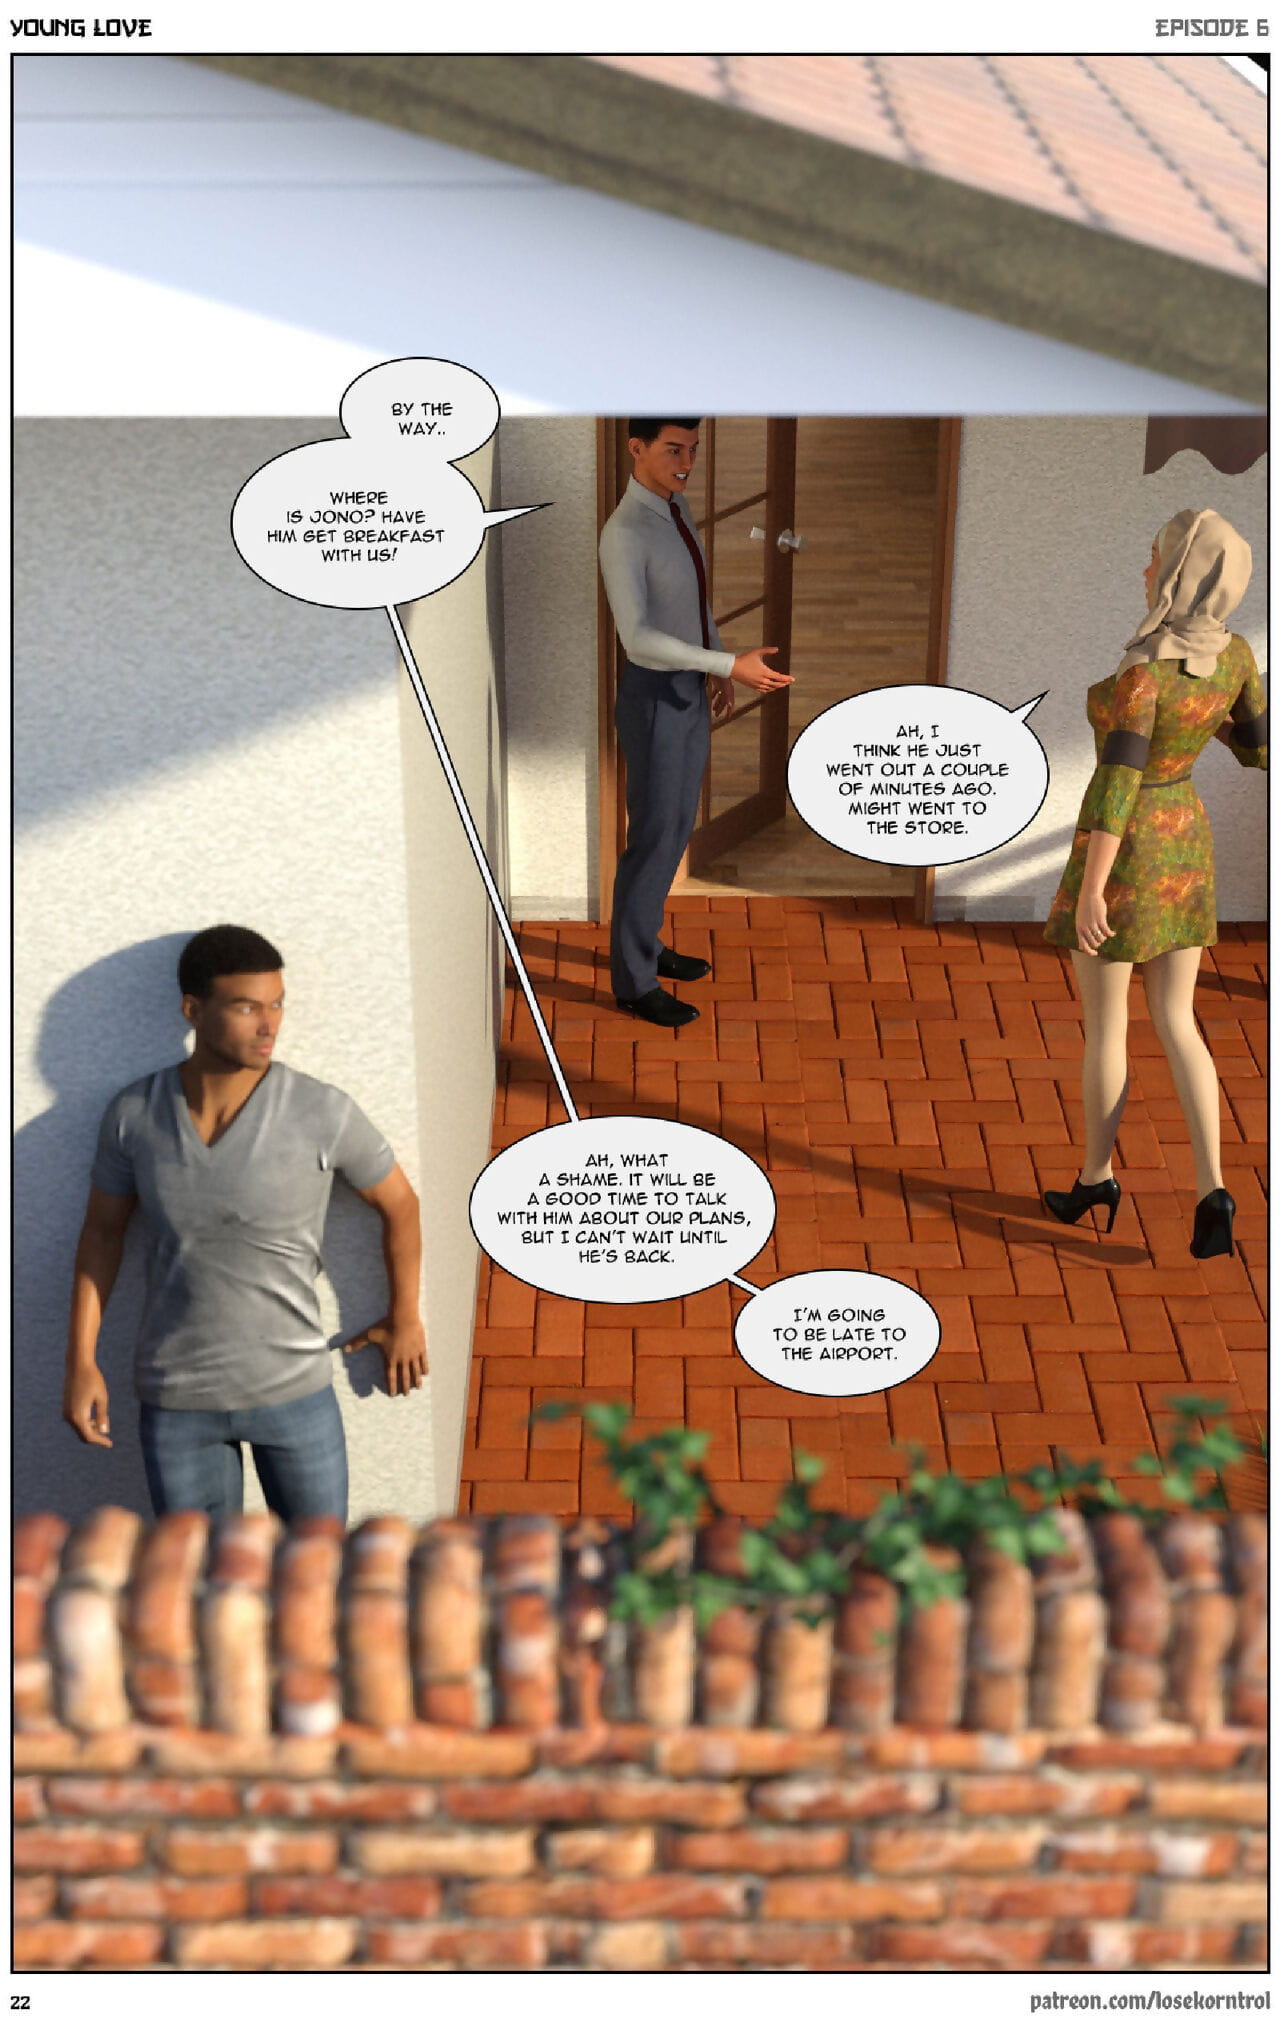 Young Love 6 page 1